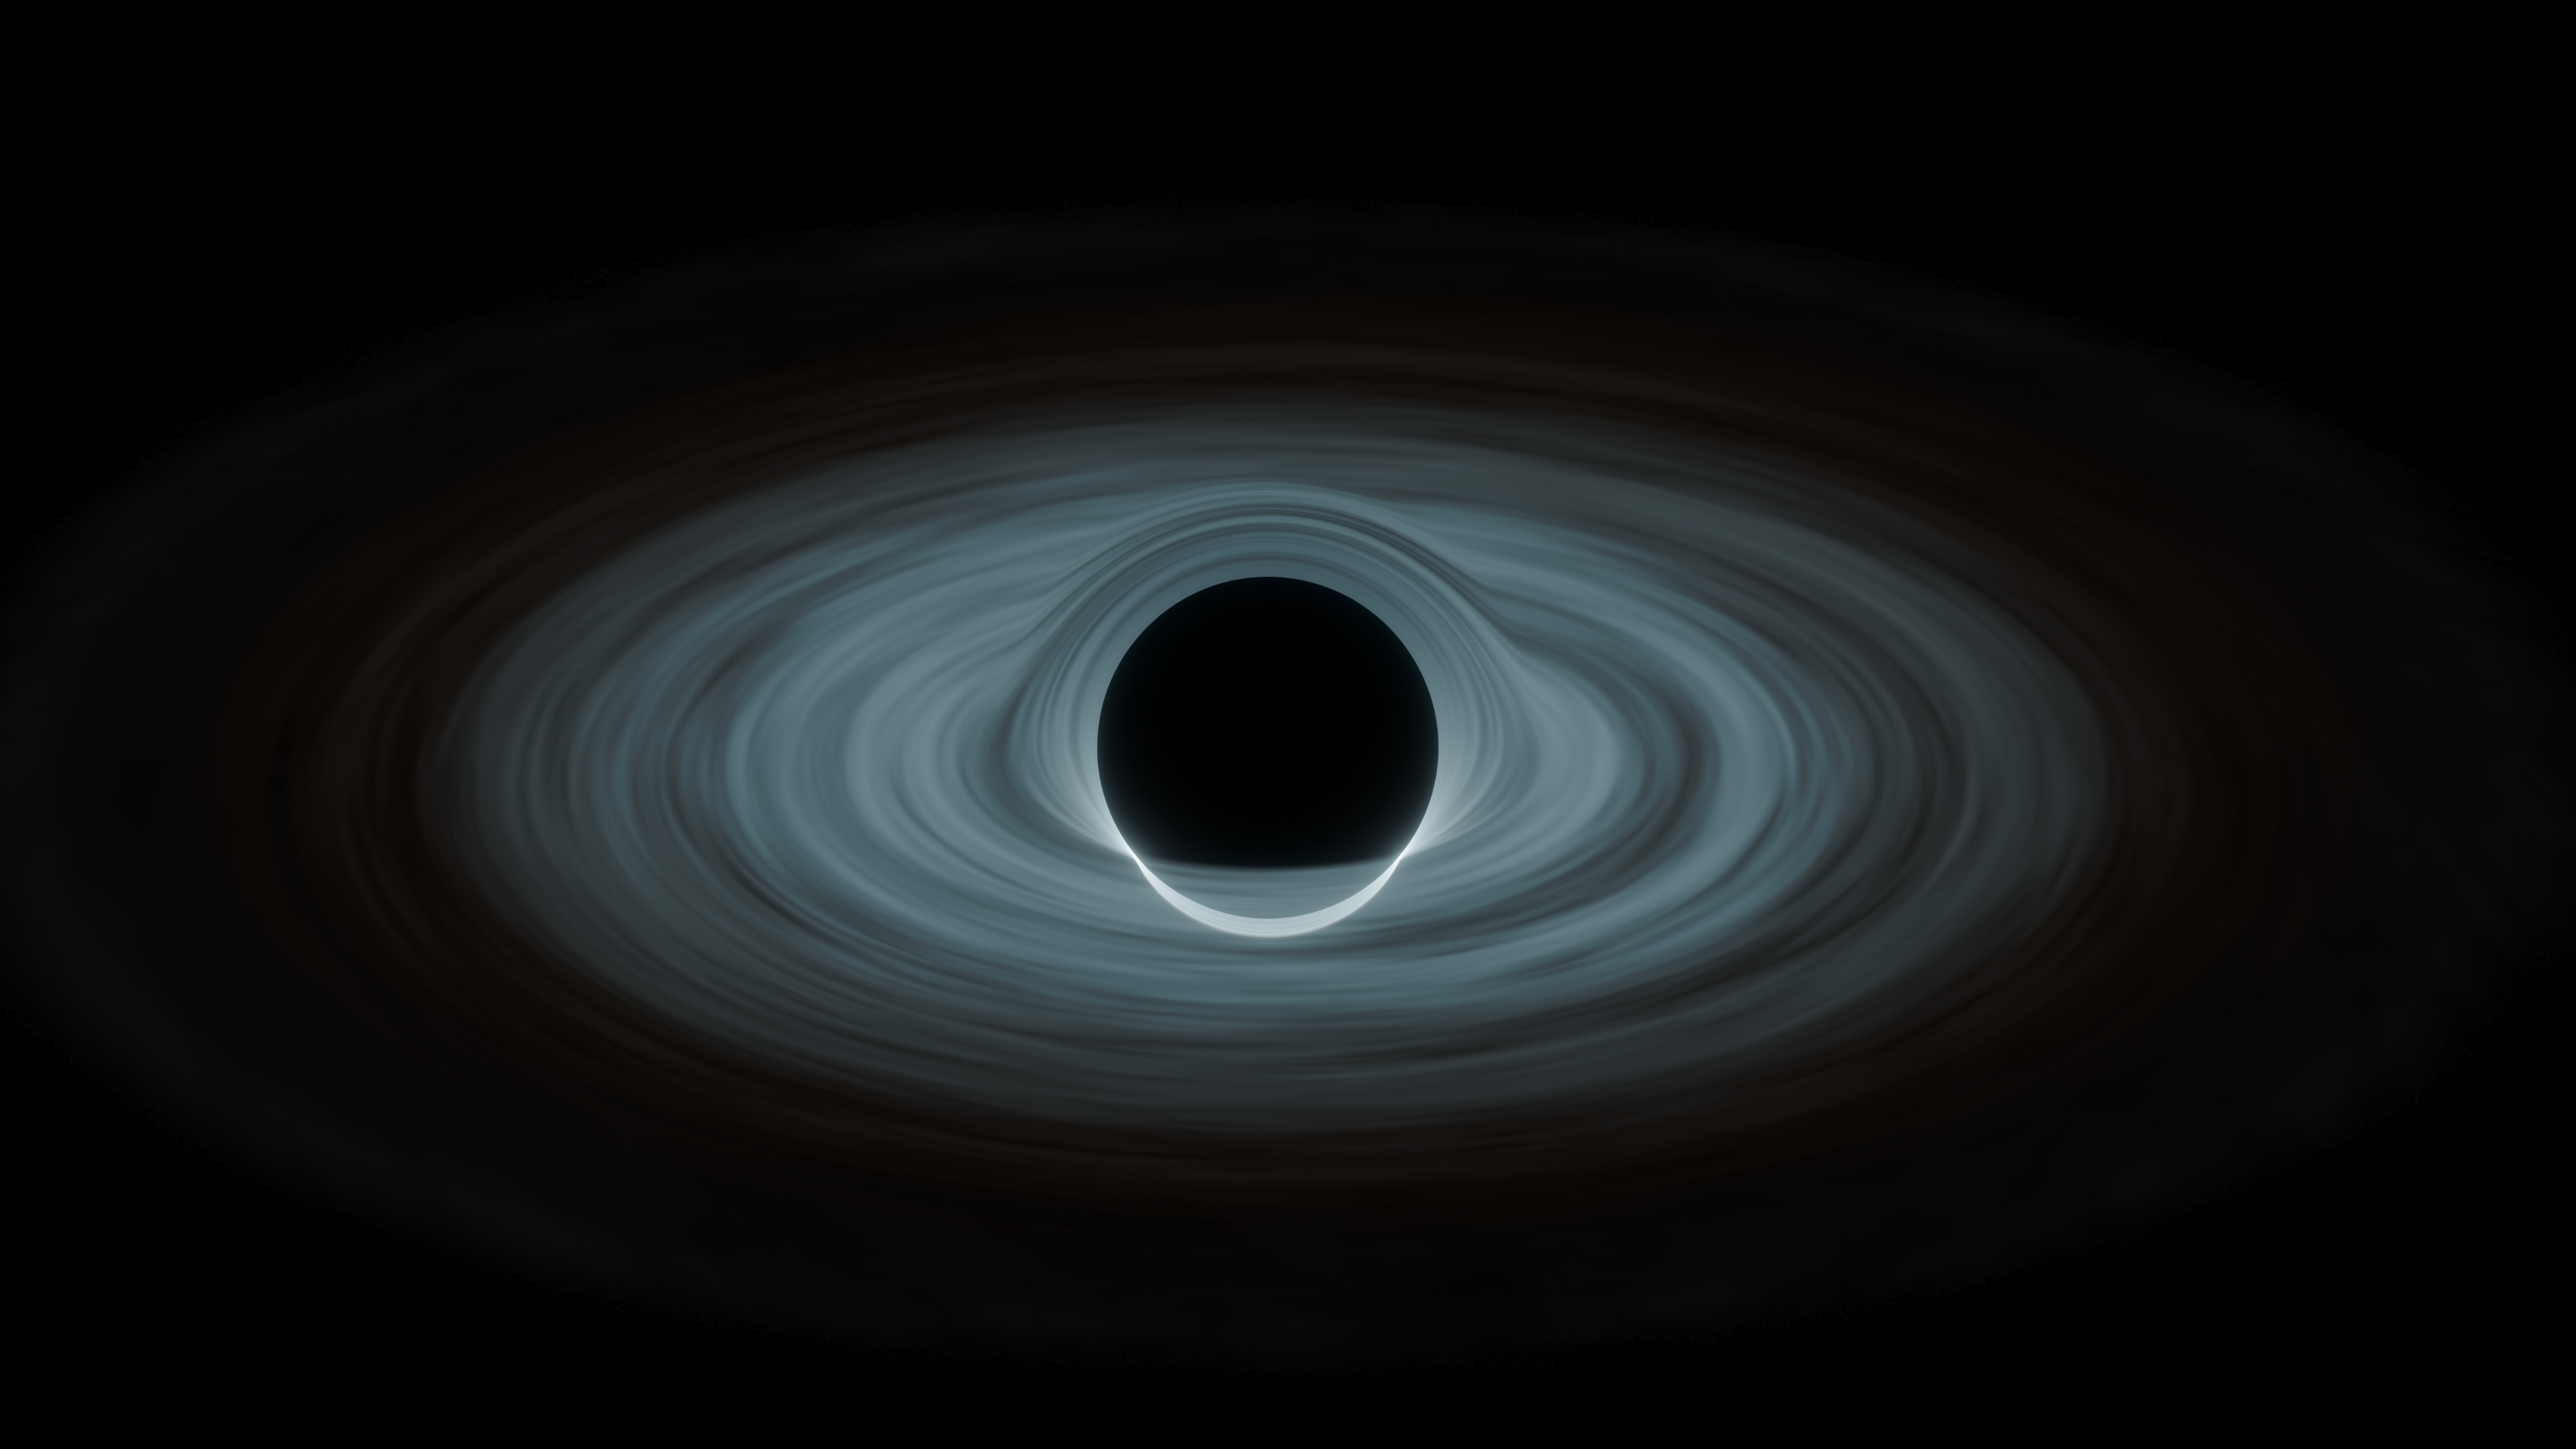 90+ Sci Fi Black Hole HD Wallpapers and Backgrounds